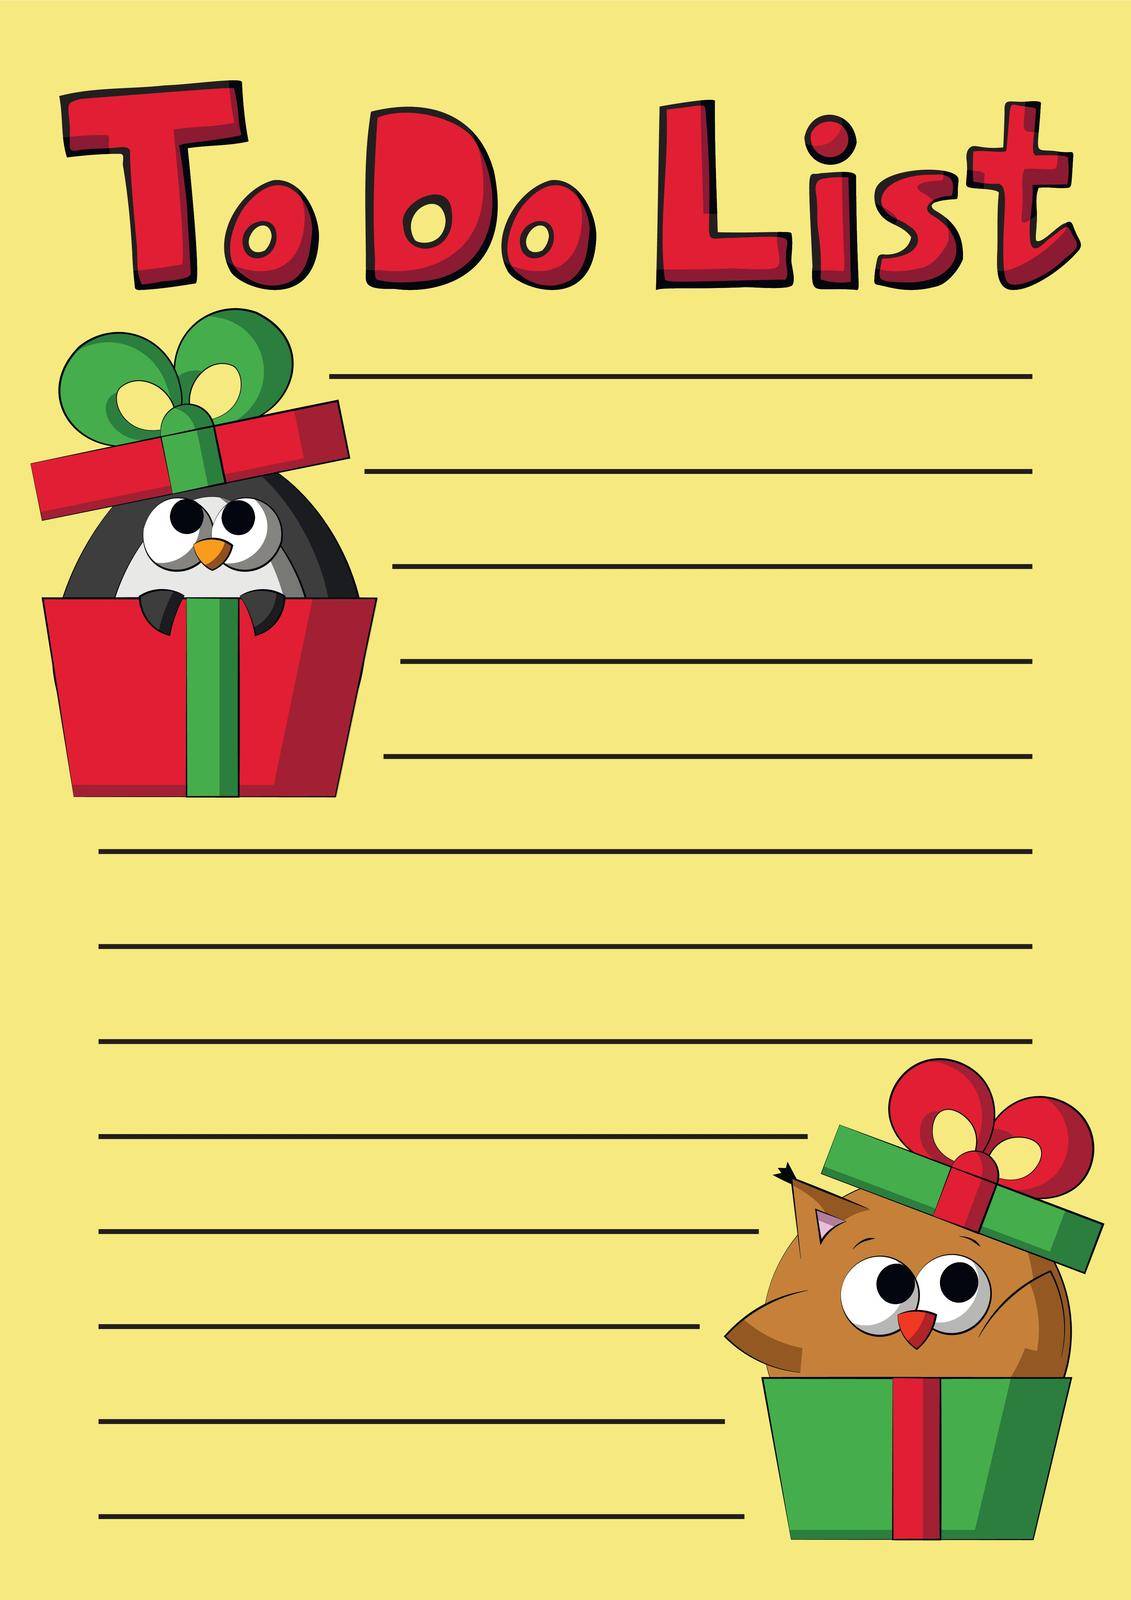 Cheek To do list with cute cartoon penguin and owl in gift box by AnastasiaPen